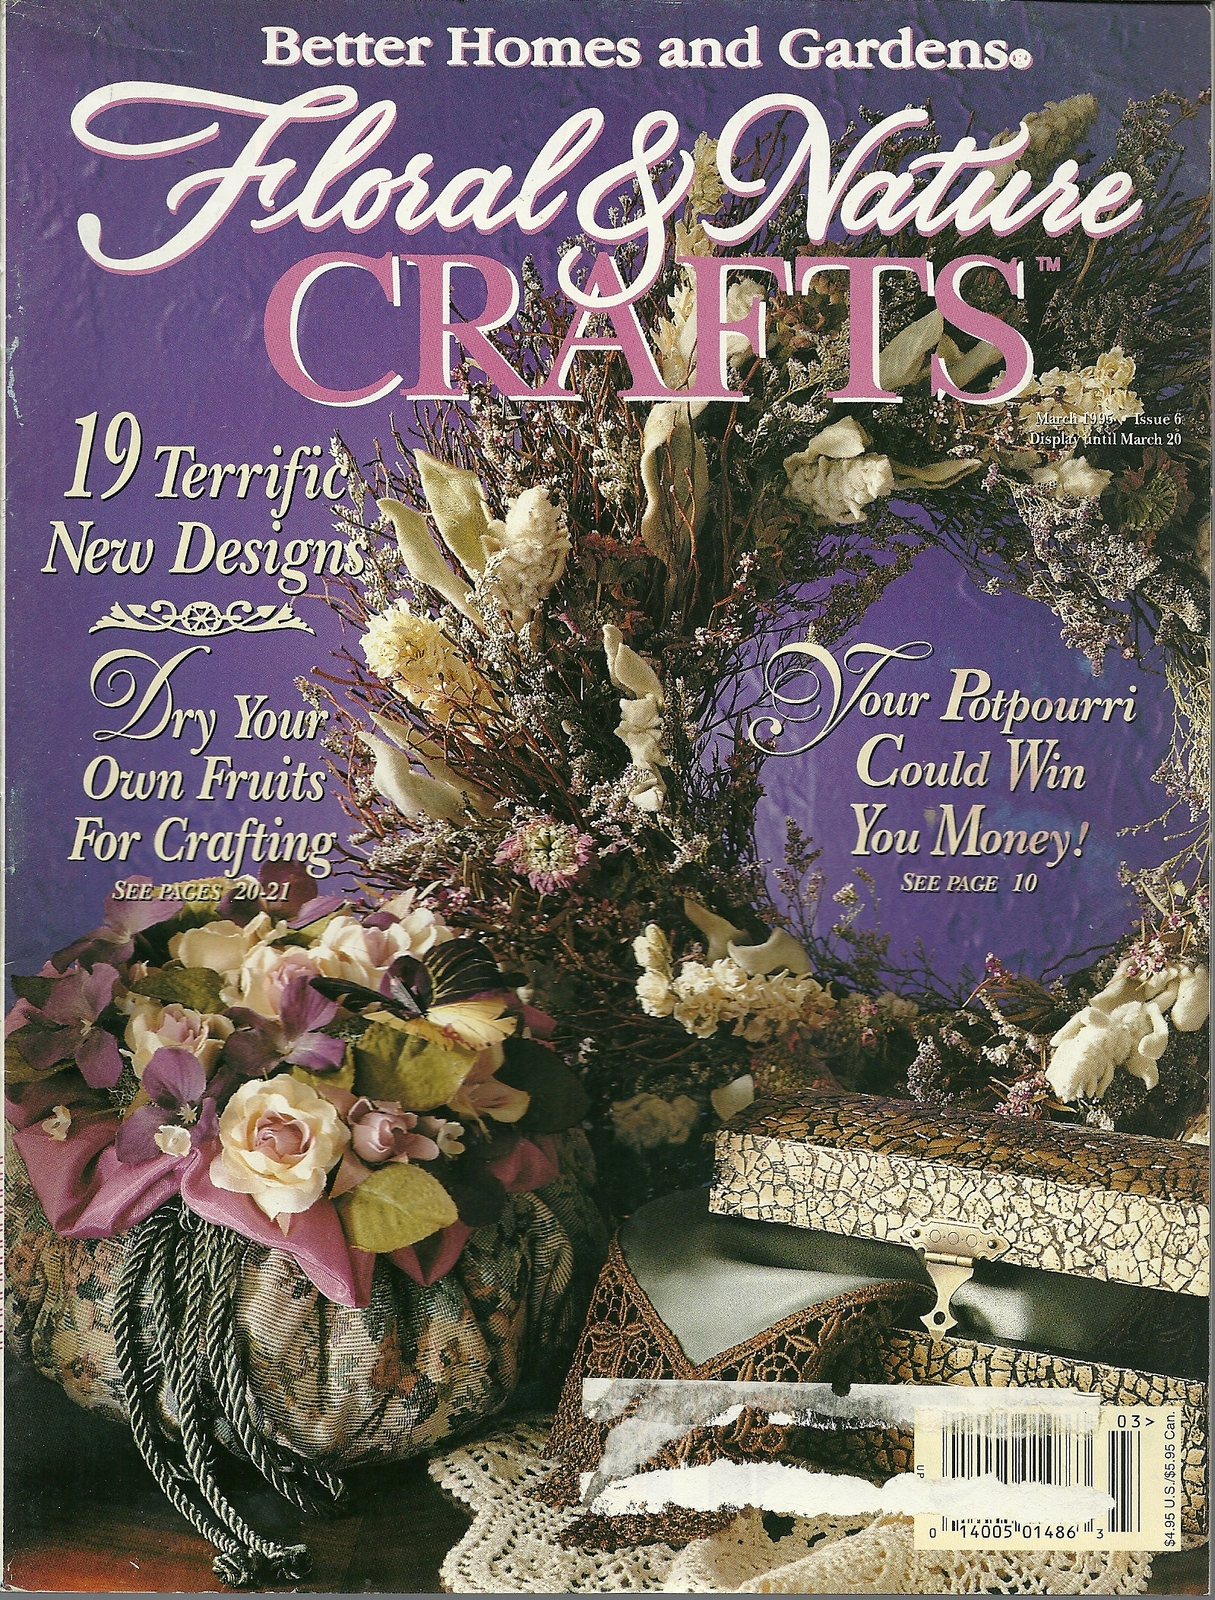 Floral & Nature Crafts Magazine Better Homes and Gardens March 1995  - $4.99